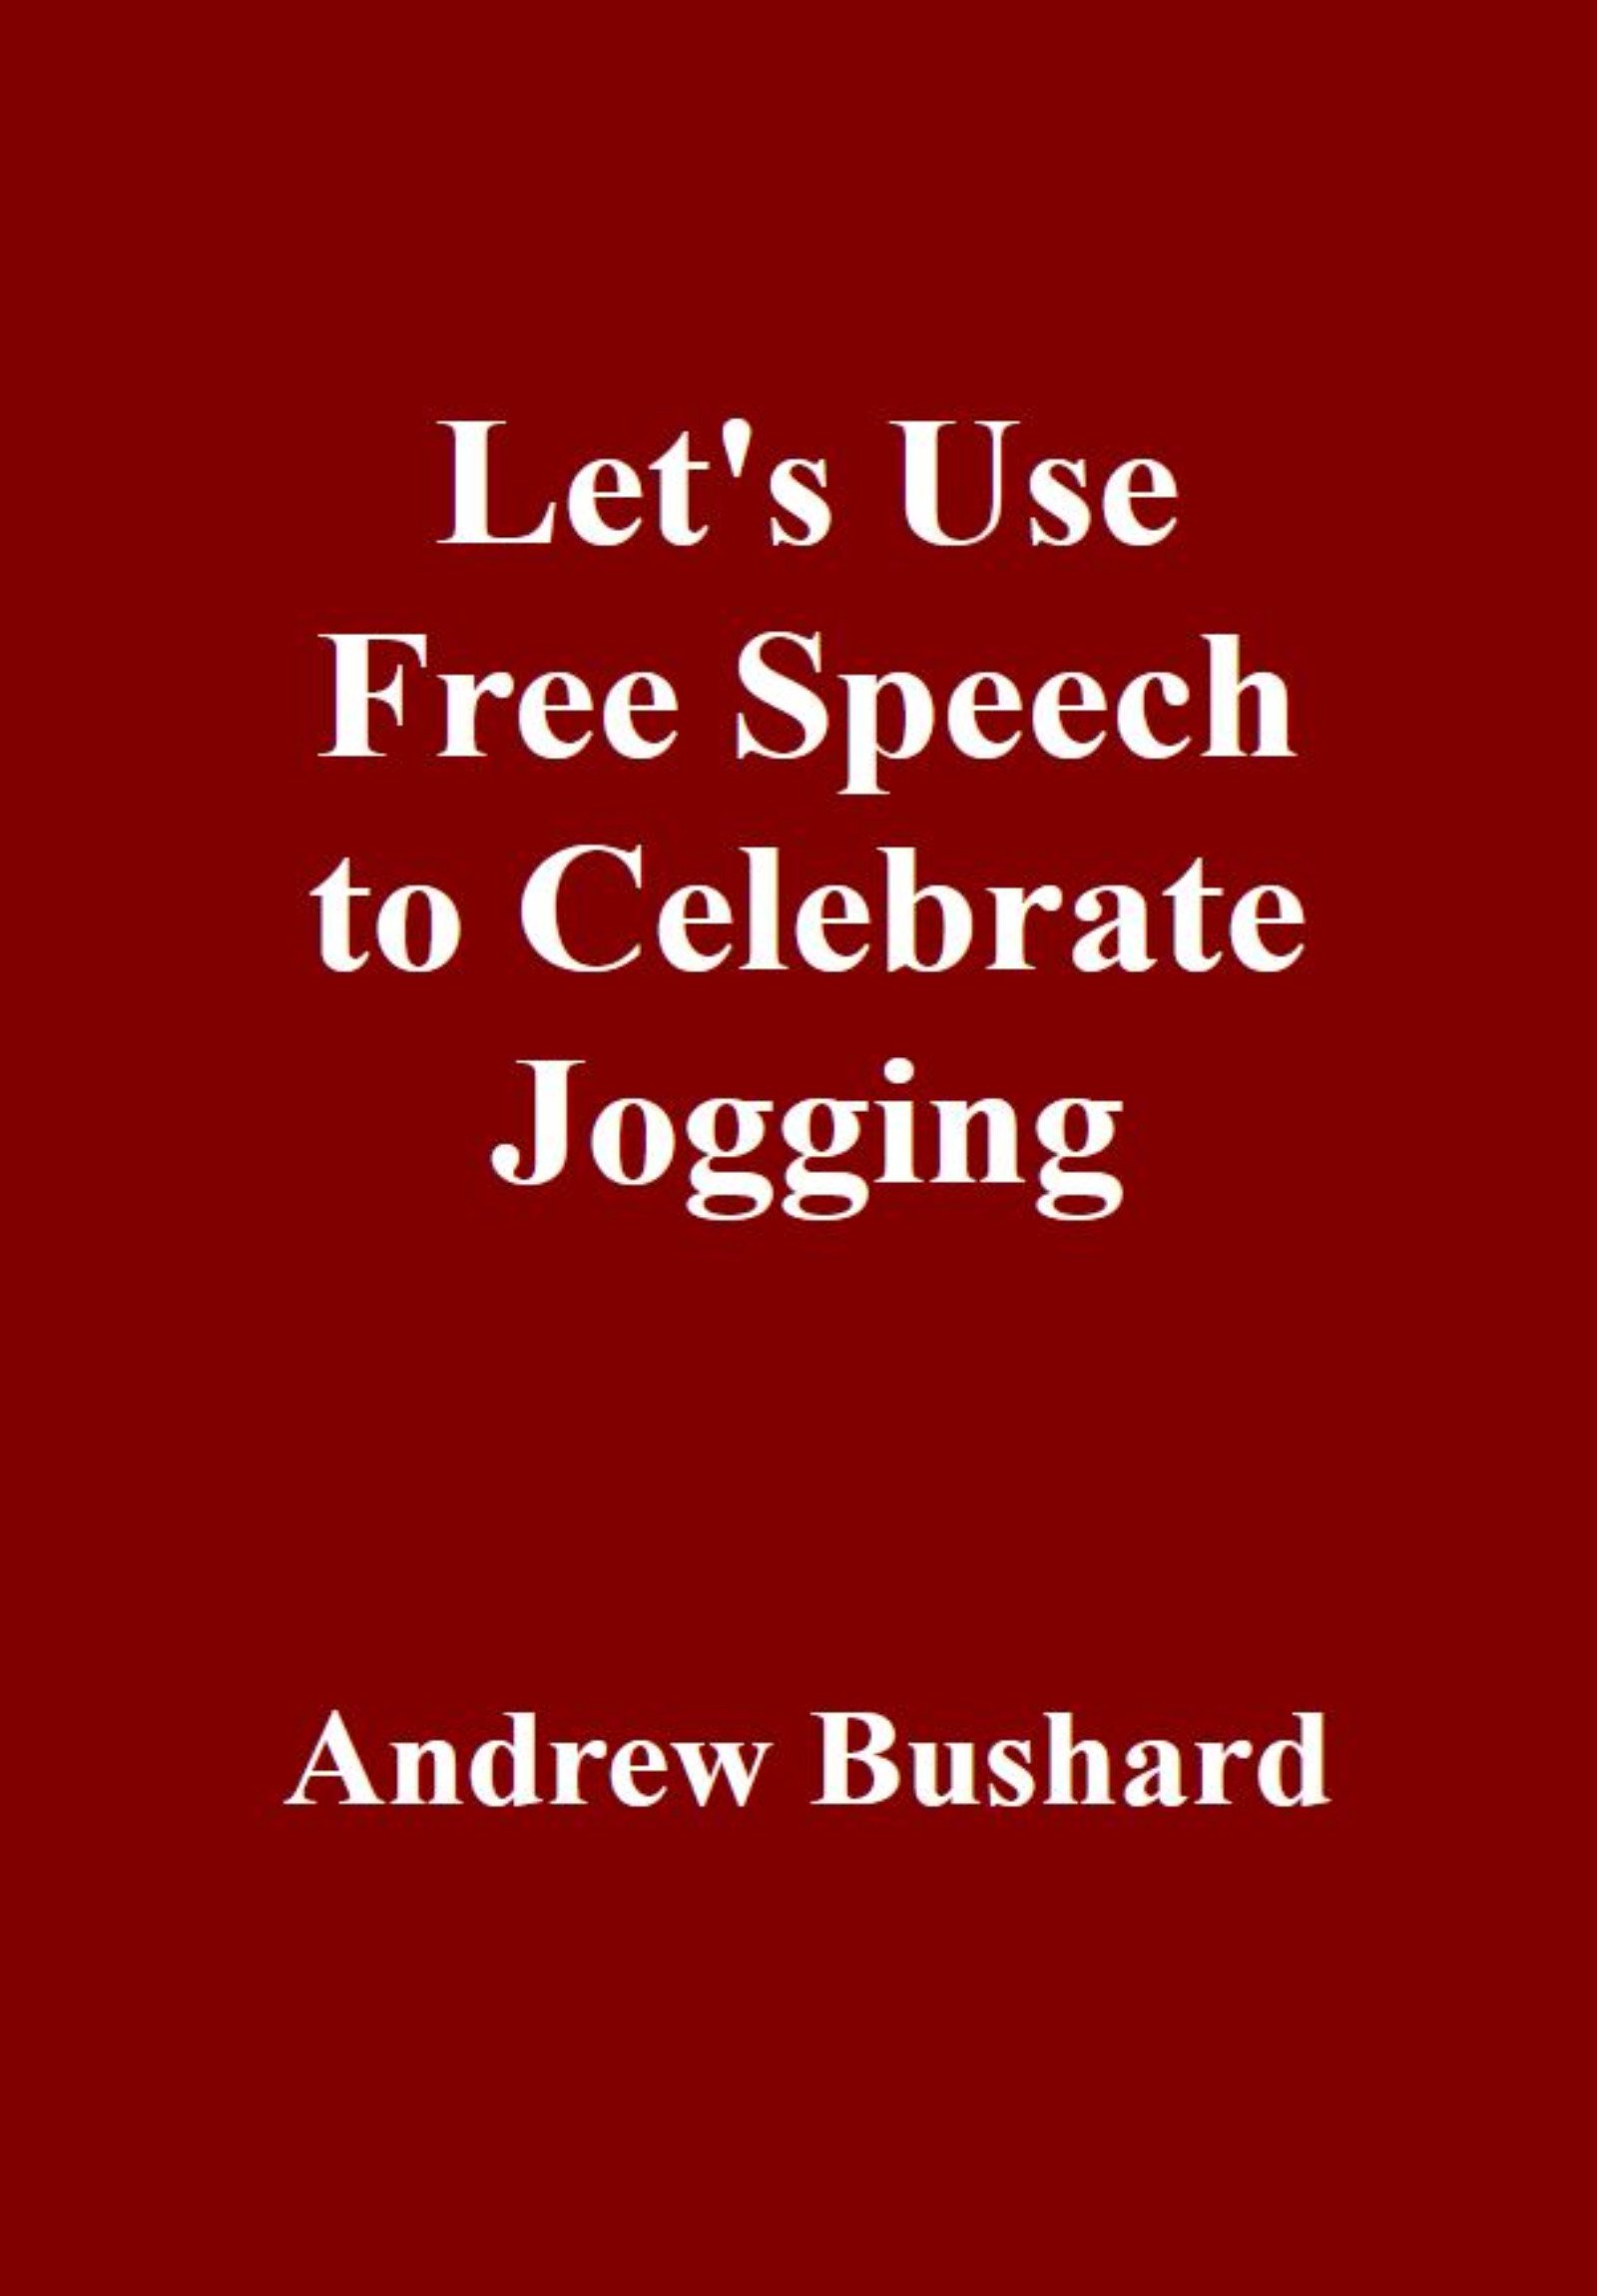 Let's Use Free Speech to Celebrate Jogging